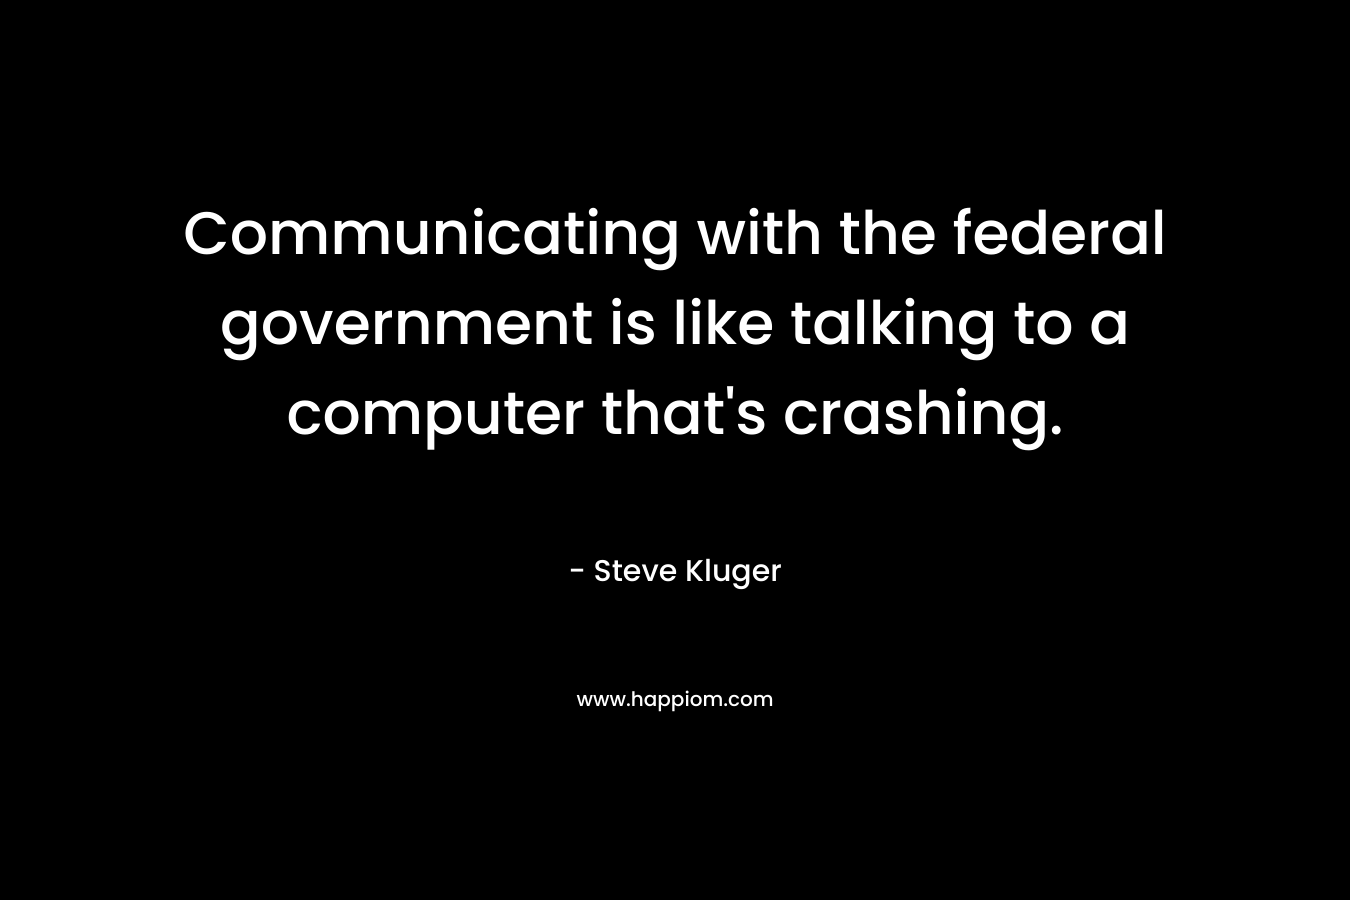 Communicating with the federal government is like talking to a computer that’s crashing. – Steve Kluger